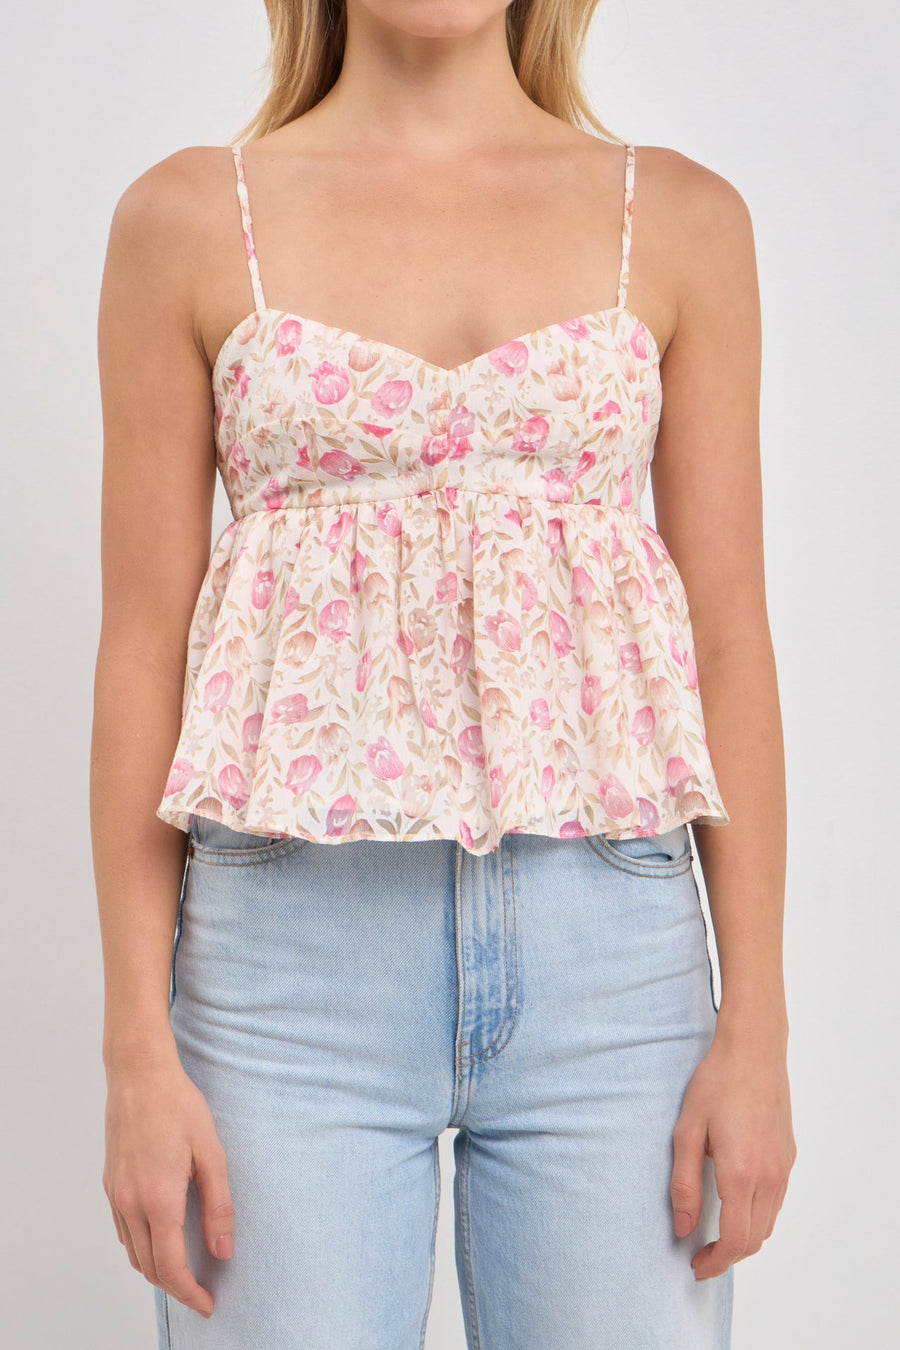 FREE THE ROSES-Floral Baby Doll Top-TOPS available at Objectrare